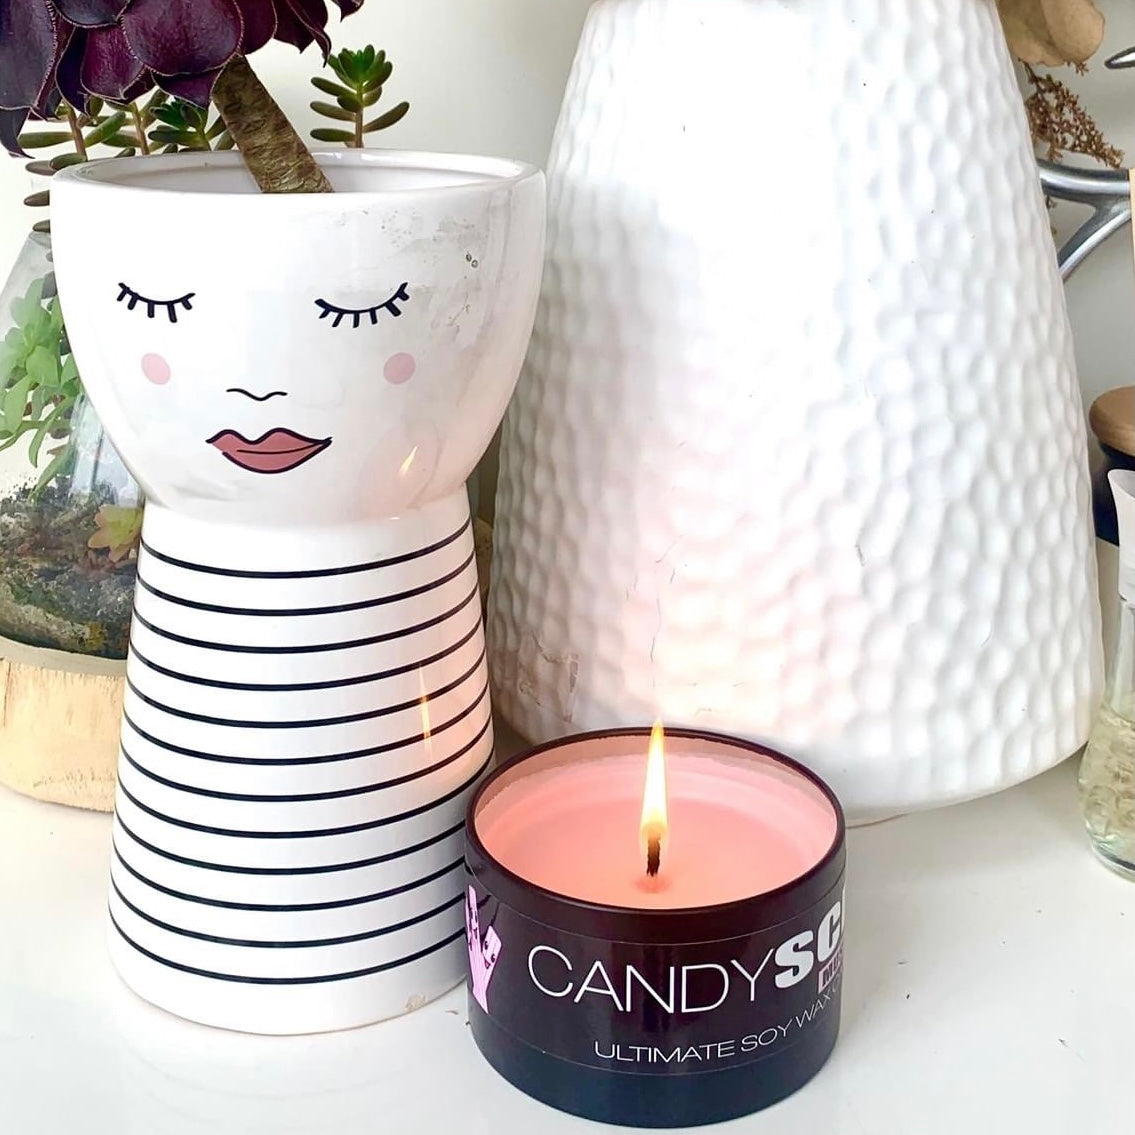 Candle care....and why is it so important?